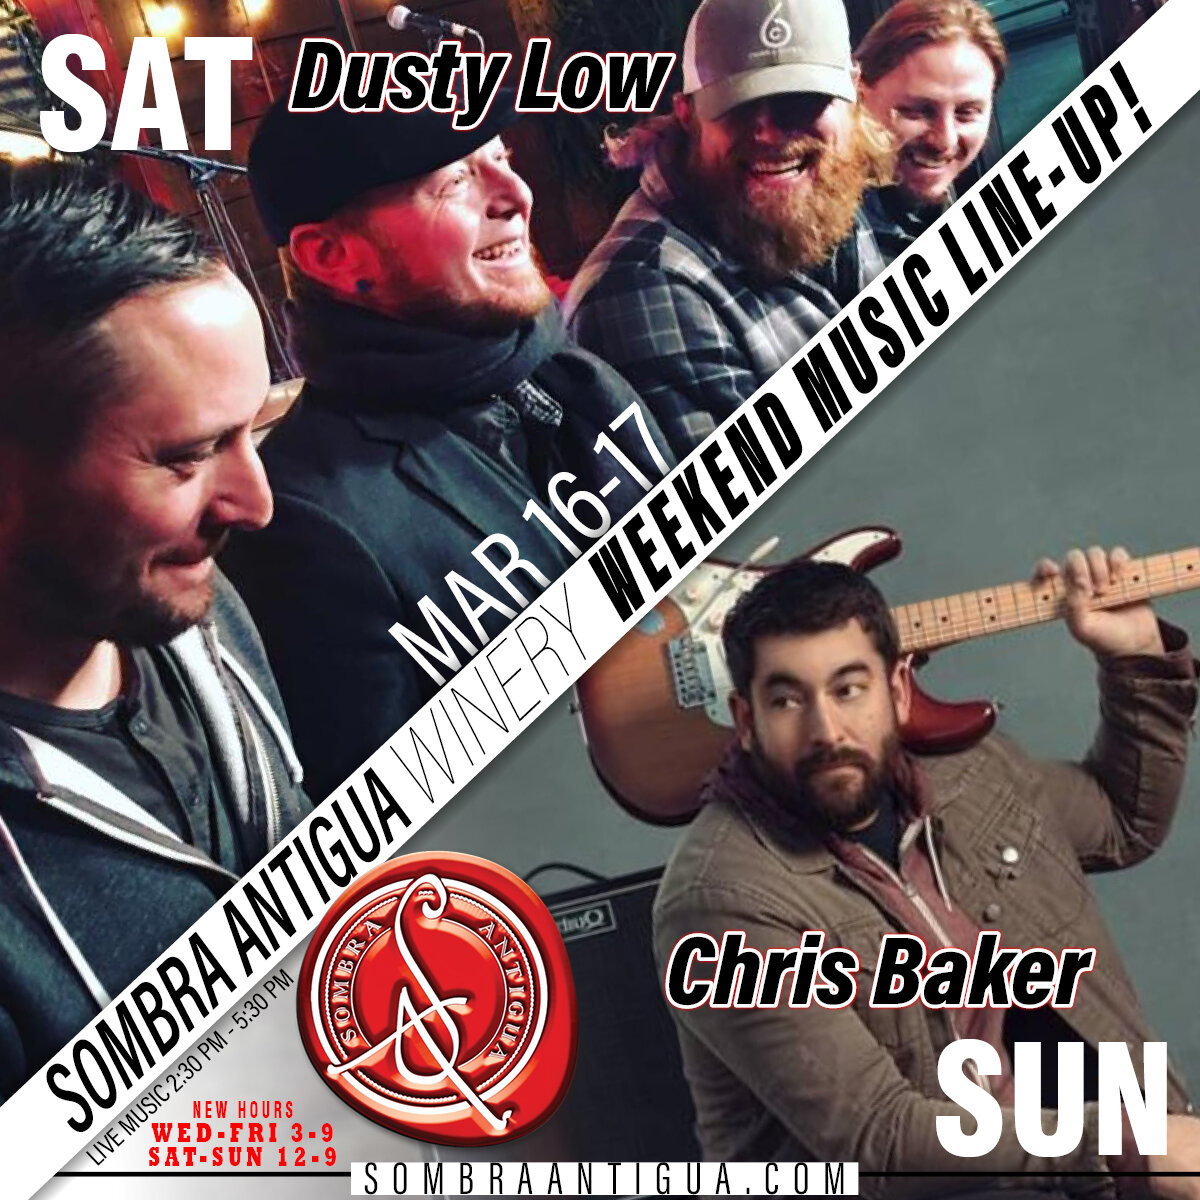 Are you ready for a fun-filled weekend? Our beloved Dusty Low gang is making a comeback this Saturday! And guess what? We also have a special performance by Chris Baker lined up for Sunday. Get ready for an unforgettable experience!
@dustylowmusic @c